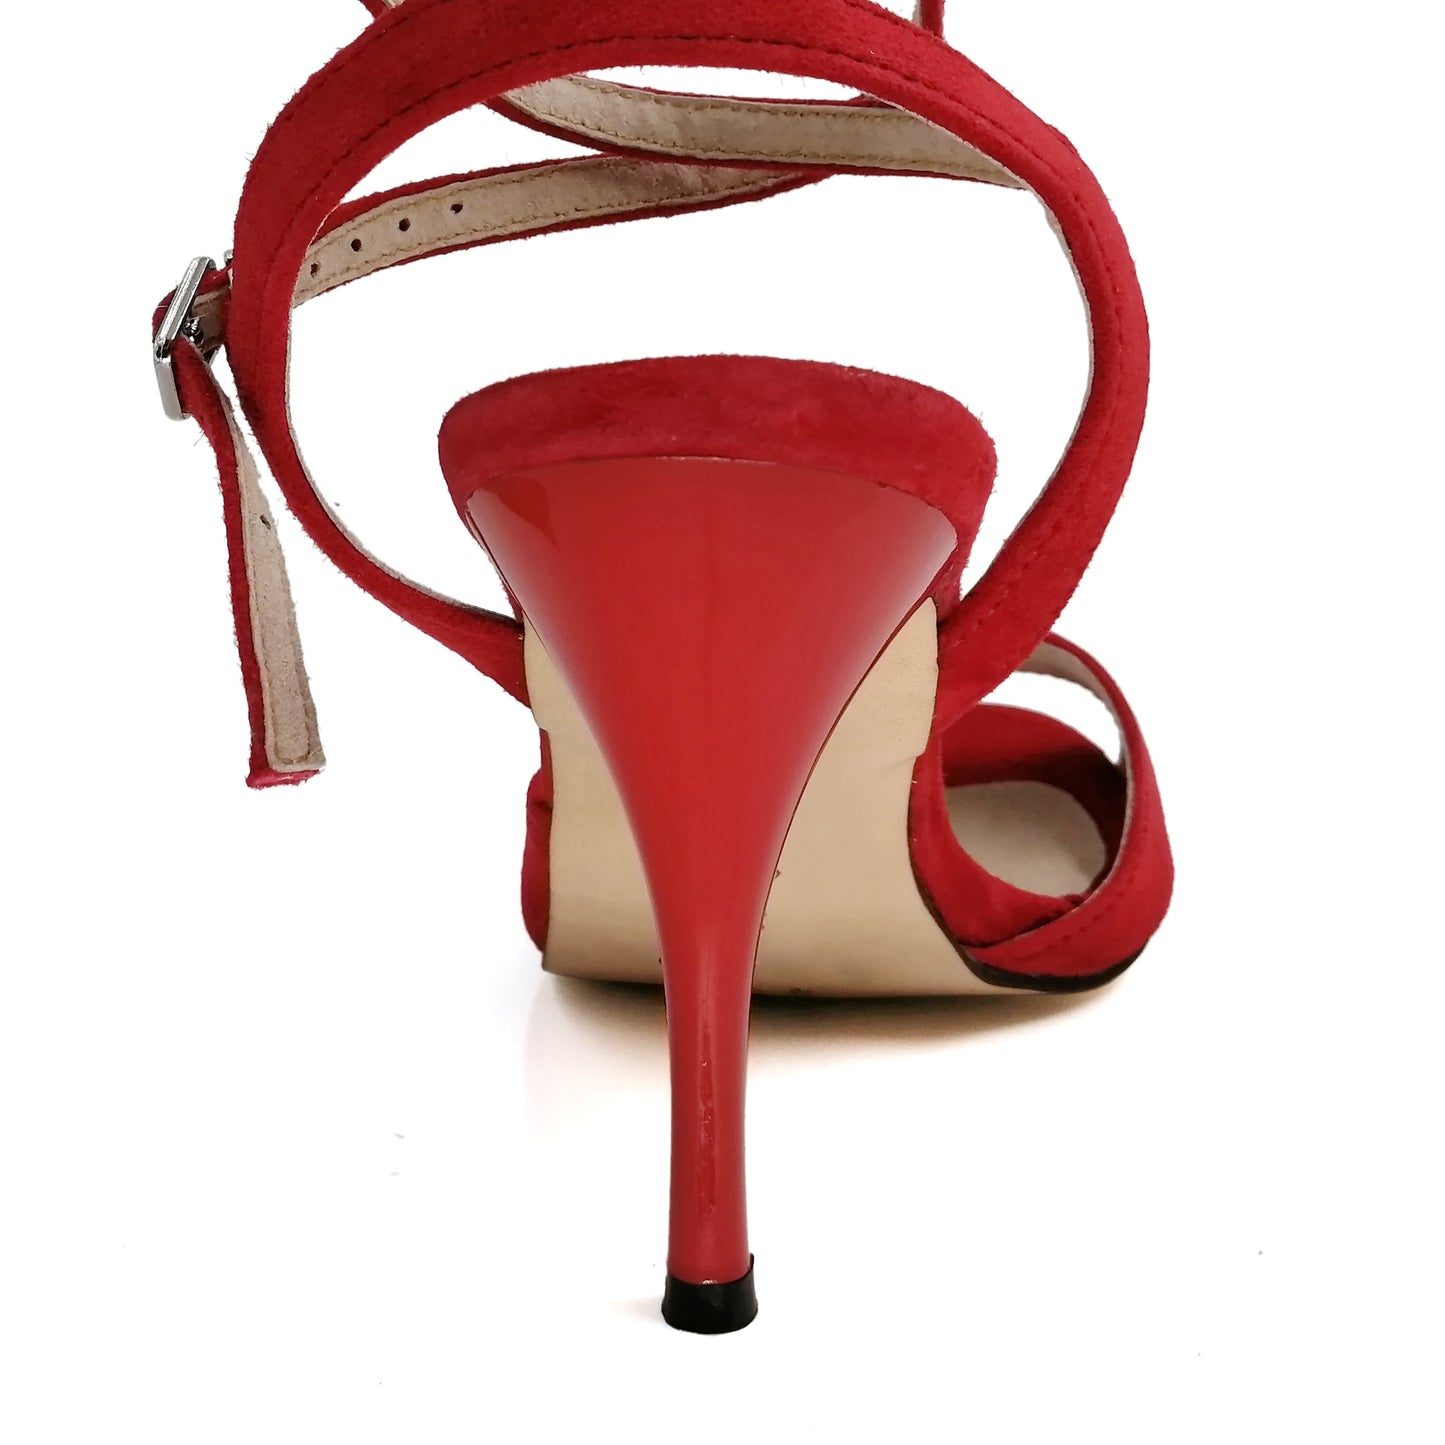 Pro Dancer Tango Dance Shoes Women High Heel Dance Sandals Leather Sole Red (PD-9006A)